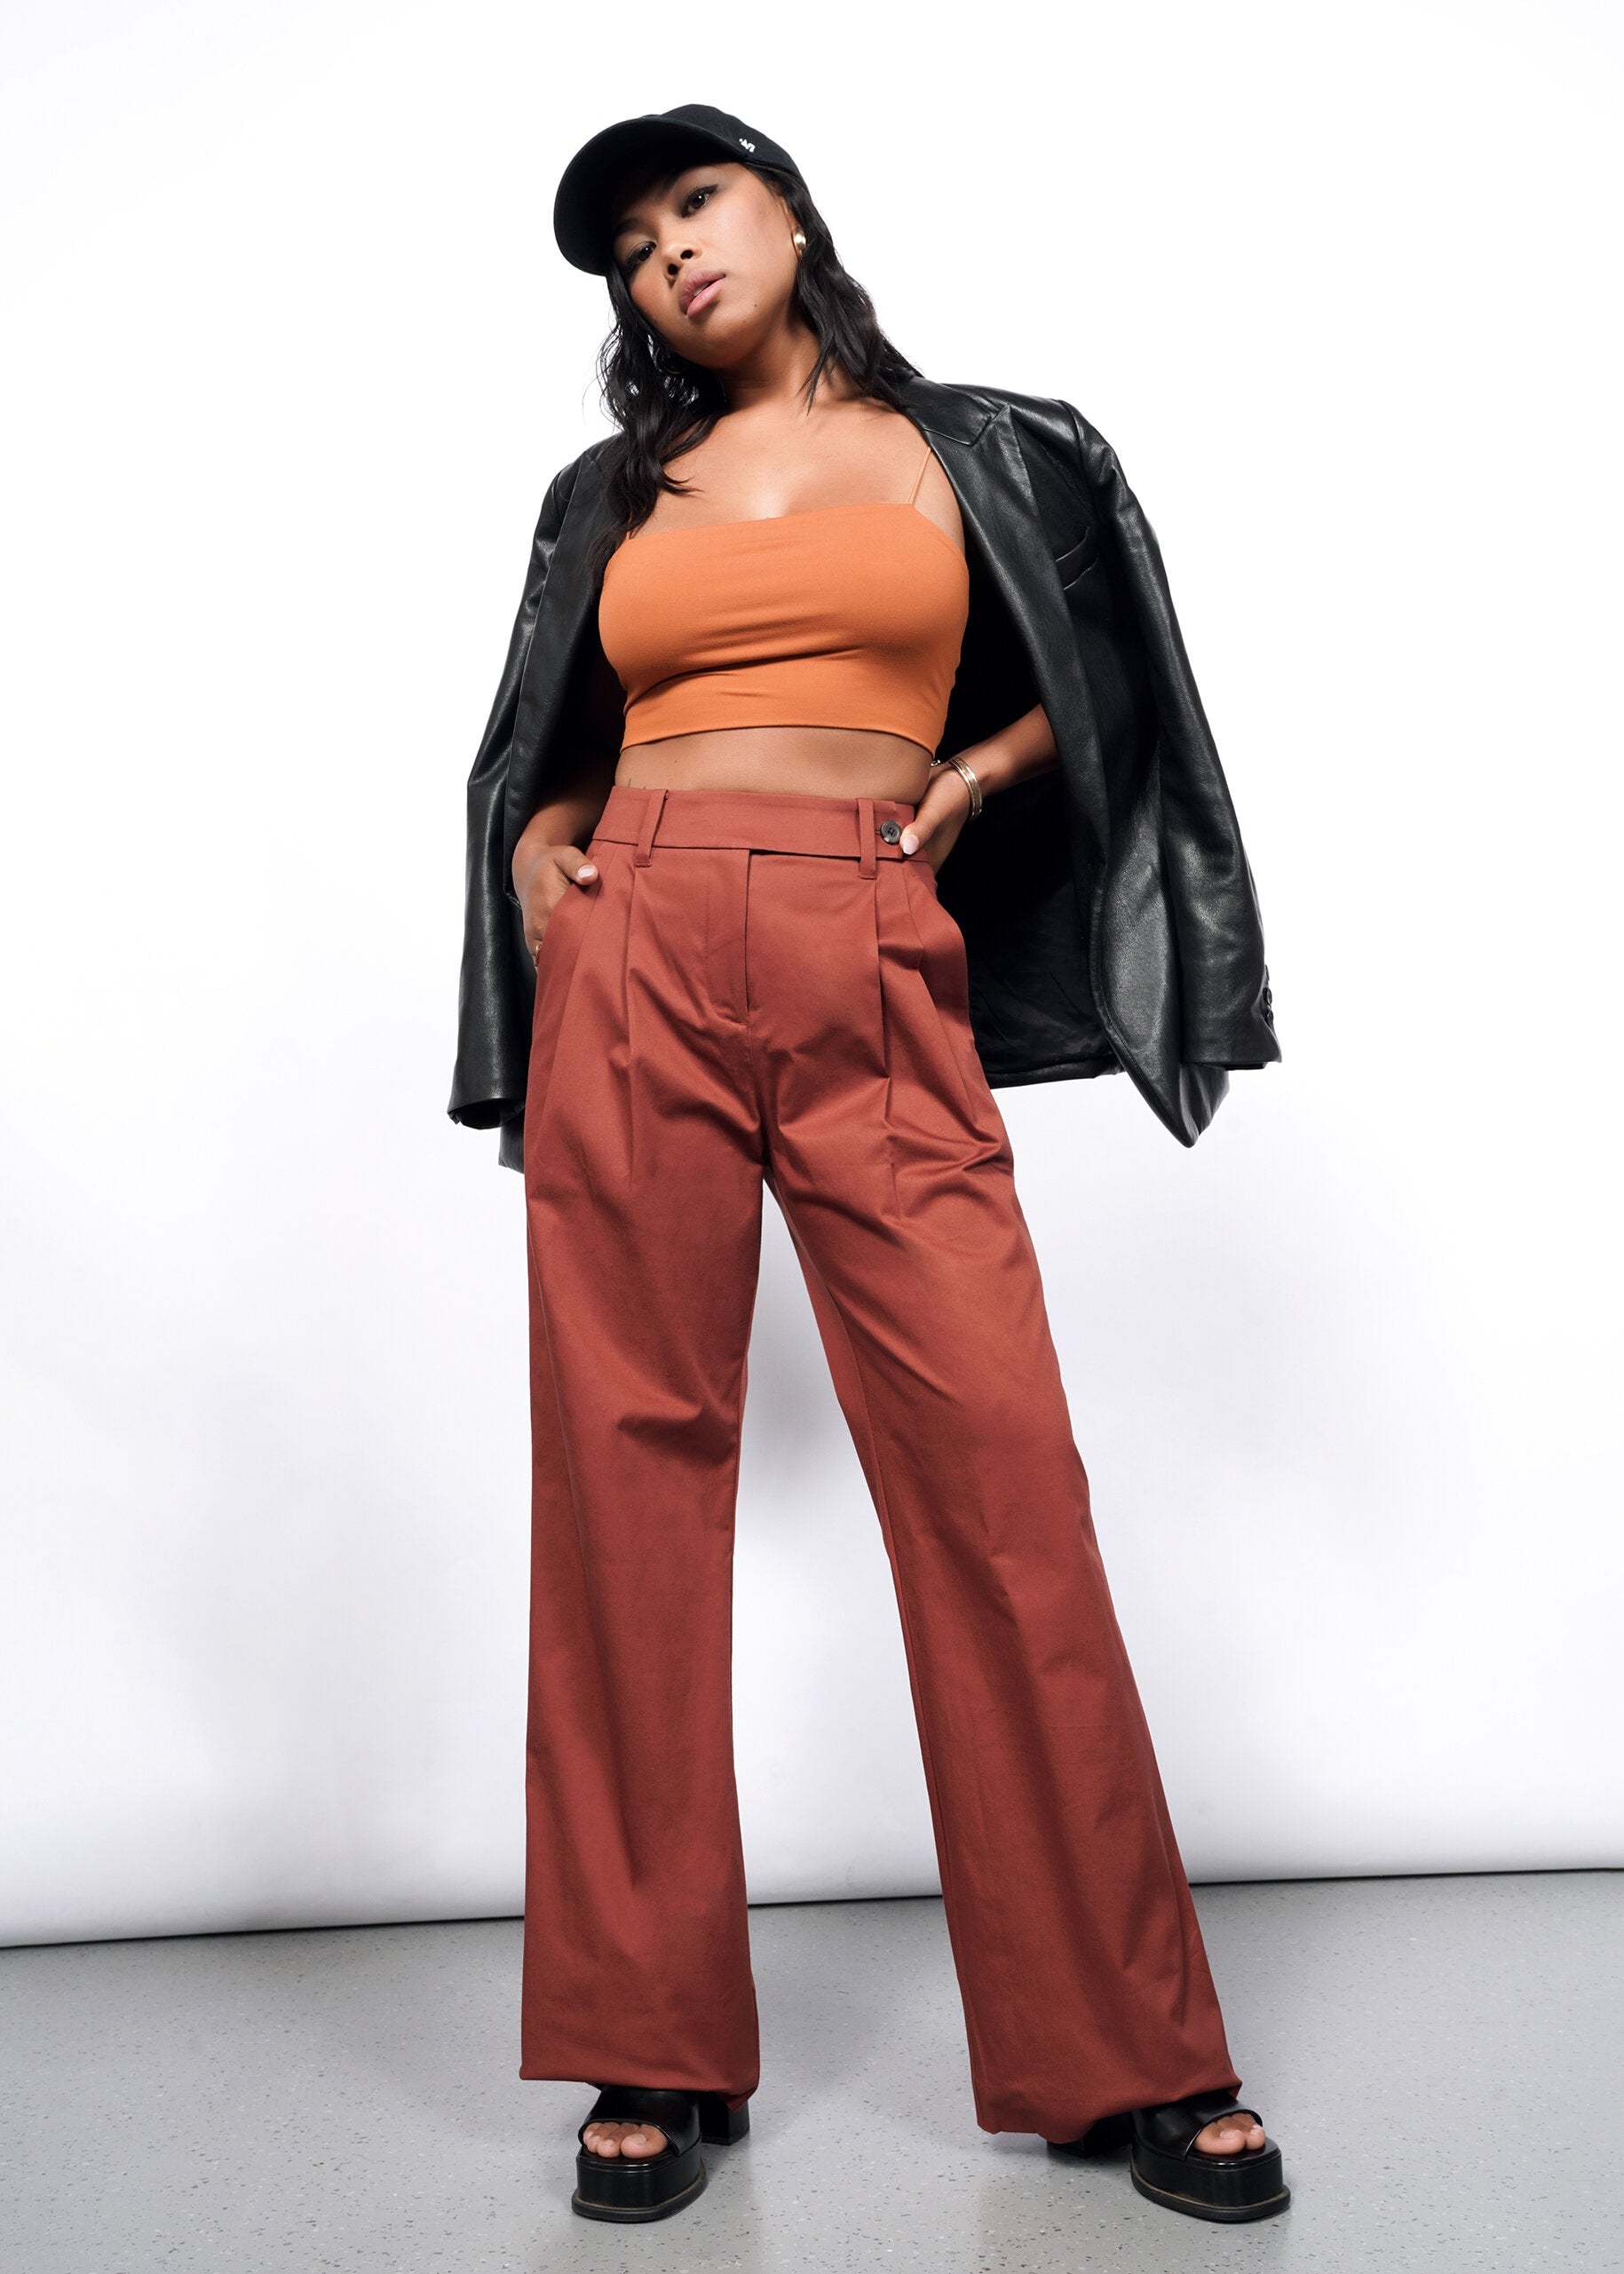 The Essential Wide Leg Trouser - Wildfang